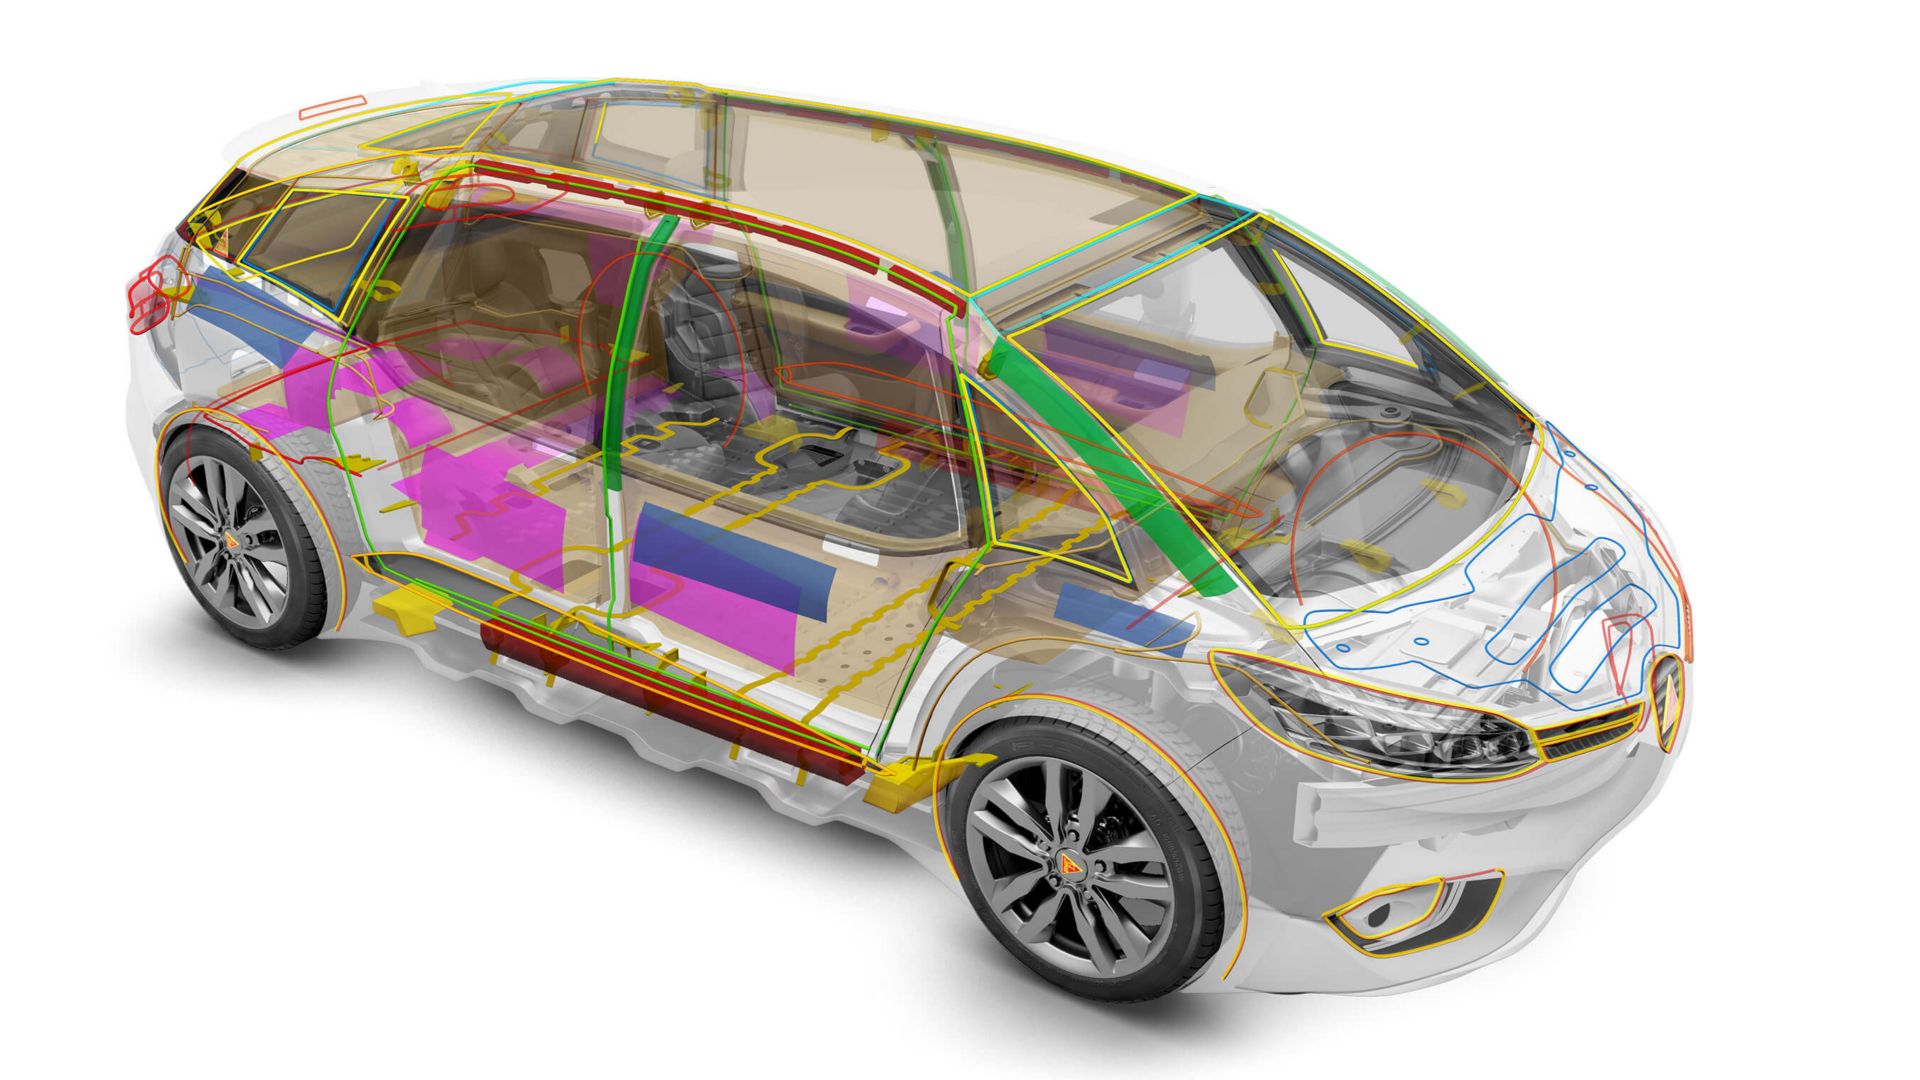 Full range of automotive bonding, damping, sealing, and reinforcing solutions